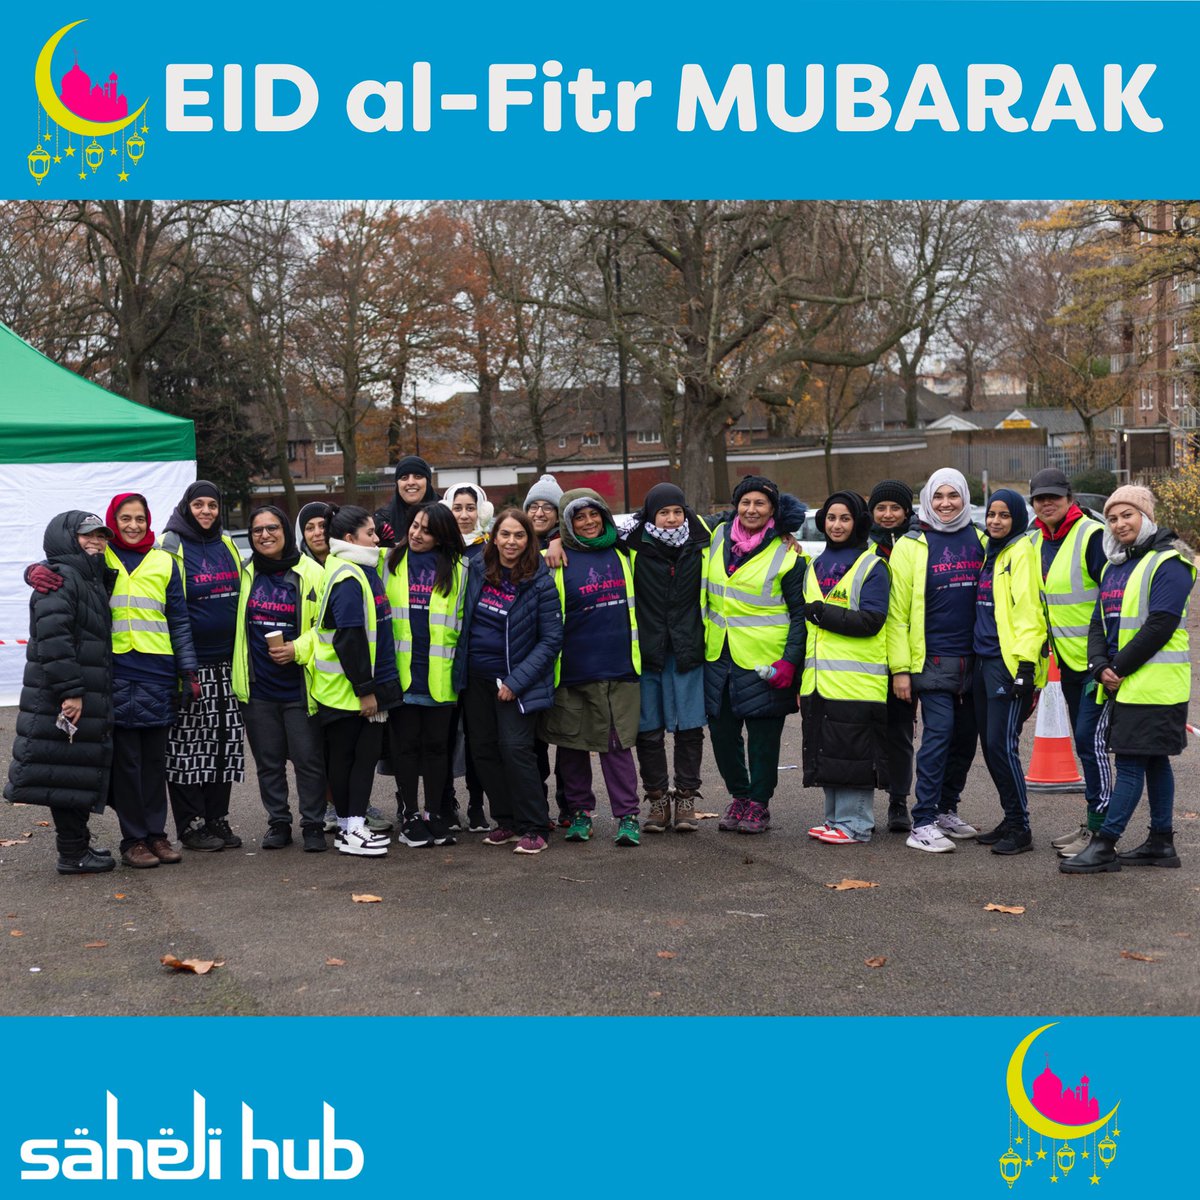 We would like to wish all those celebrating with family and friends Eid al-Fitr Mubarak. As always, we hope this year brings you the joy of community, connection, love and peace. 🌙 #teamsaheli #eidmubarak #diversecommunities #ActiveCommunities #birminghamactivities #eid #love